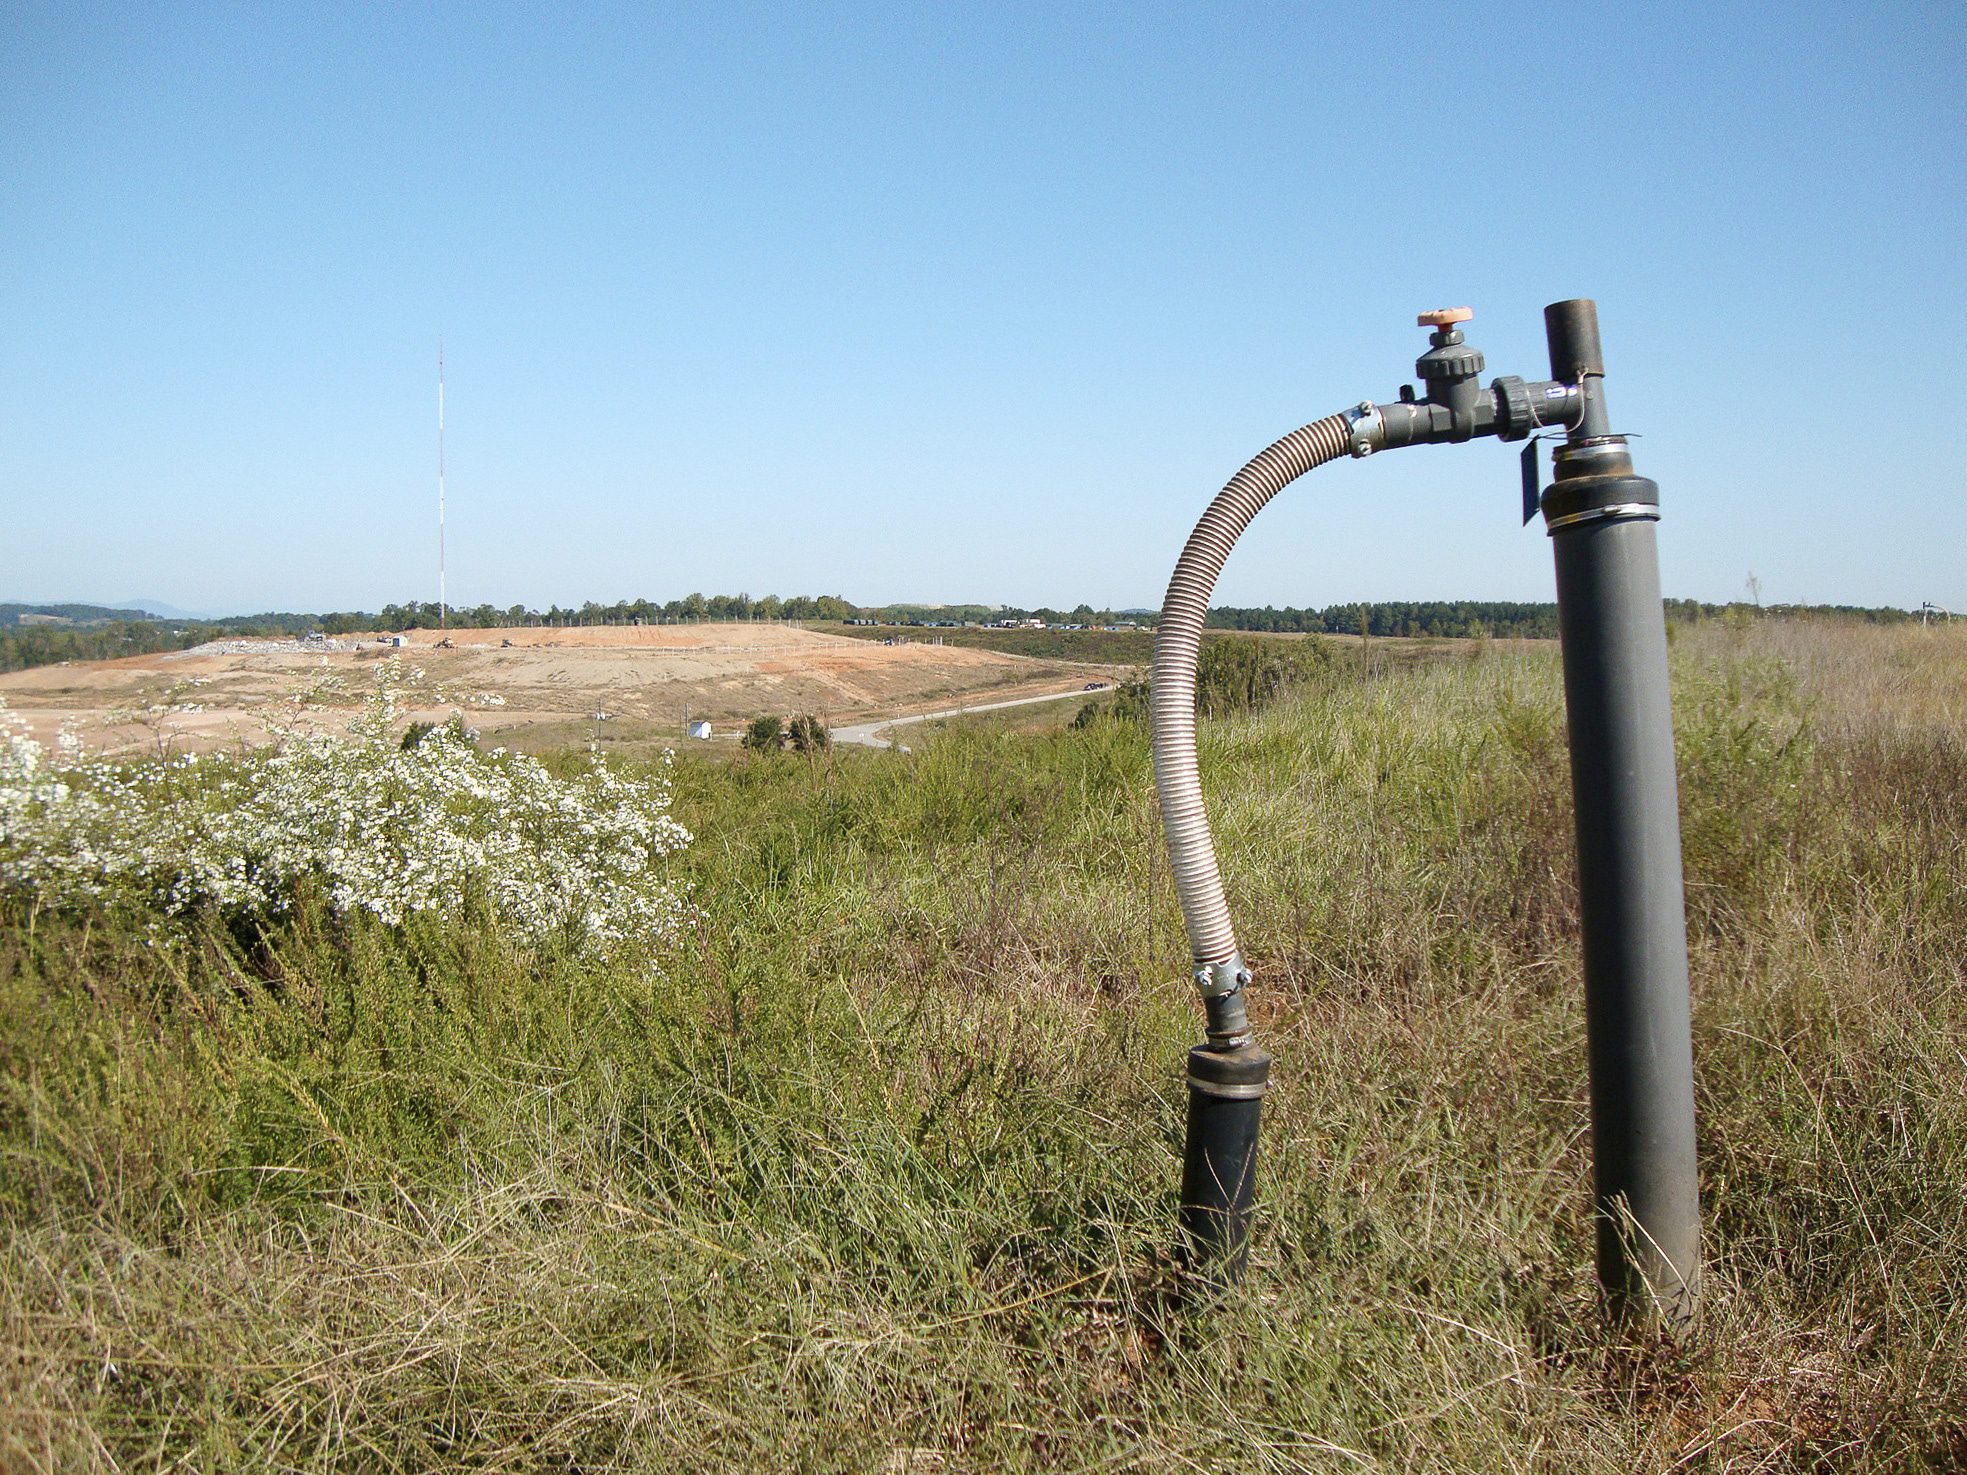 Gas pipe with large landfill in the background